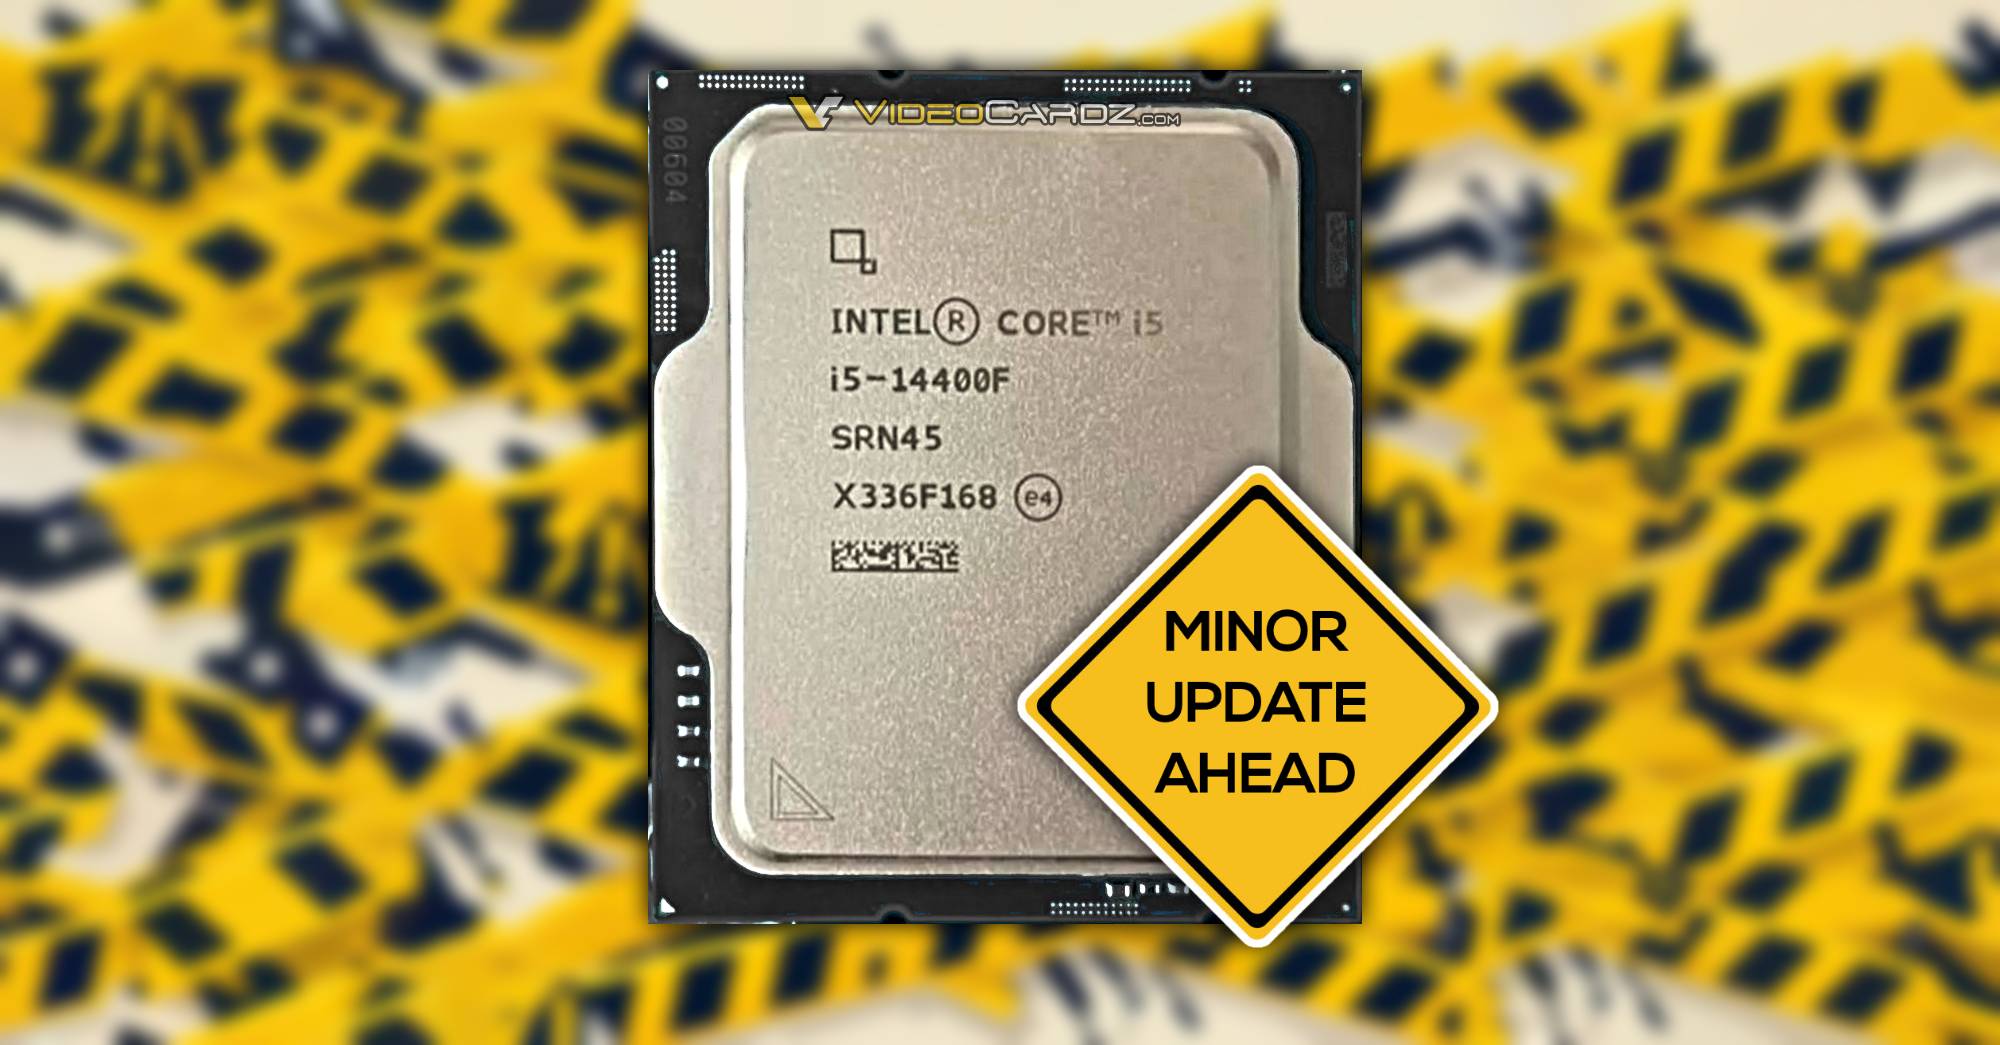 Intel's unreleased Core i5-14400F desktop CPU has been tested